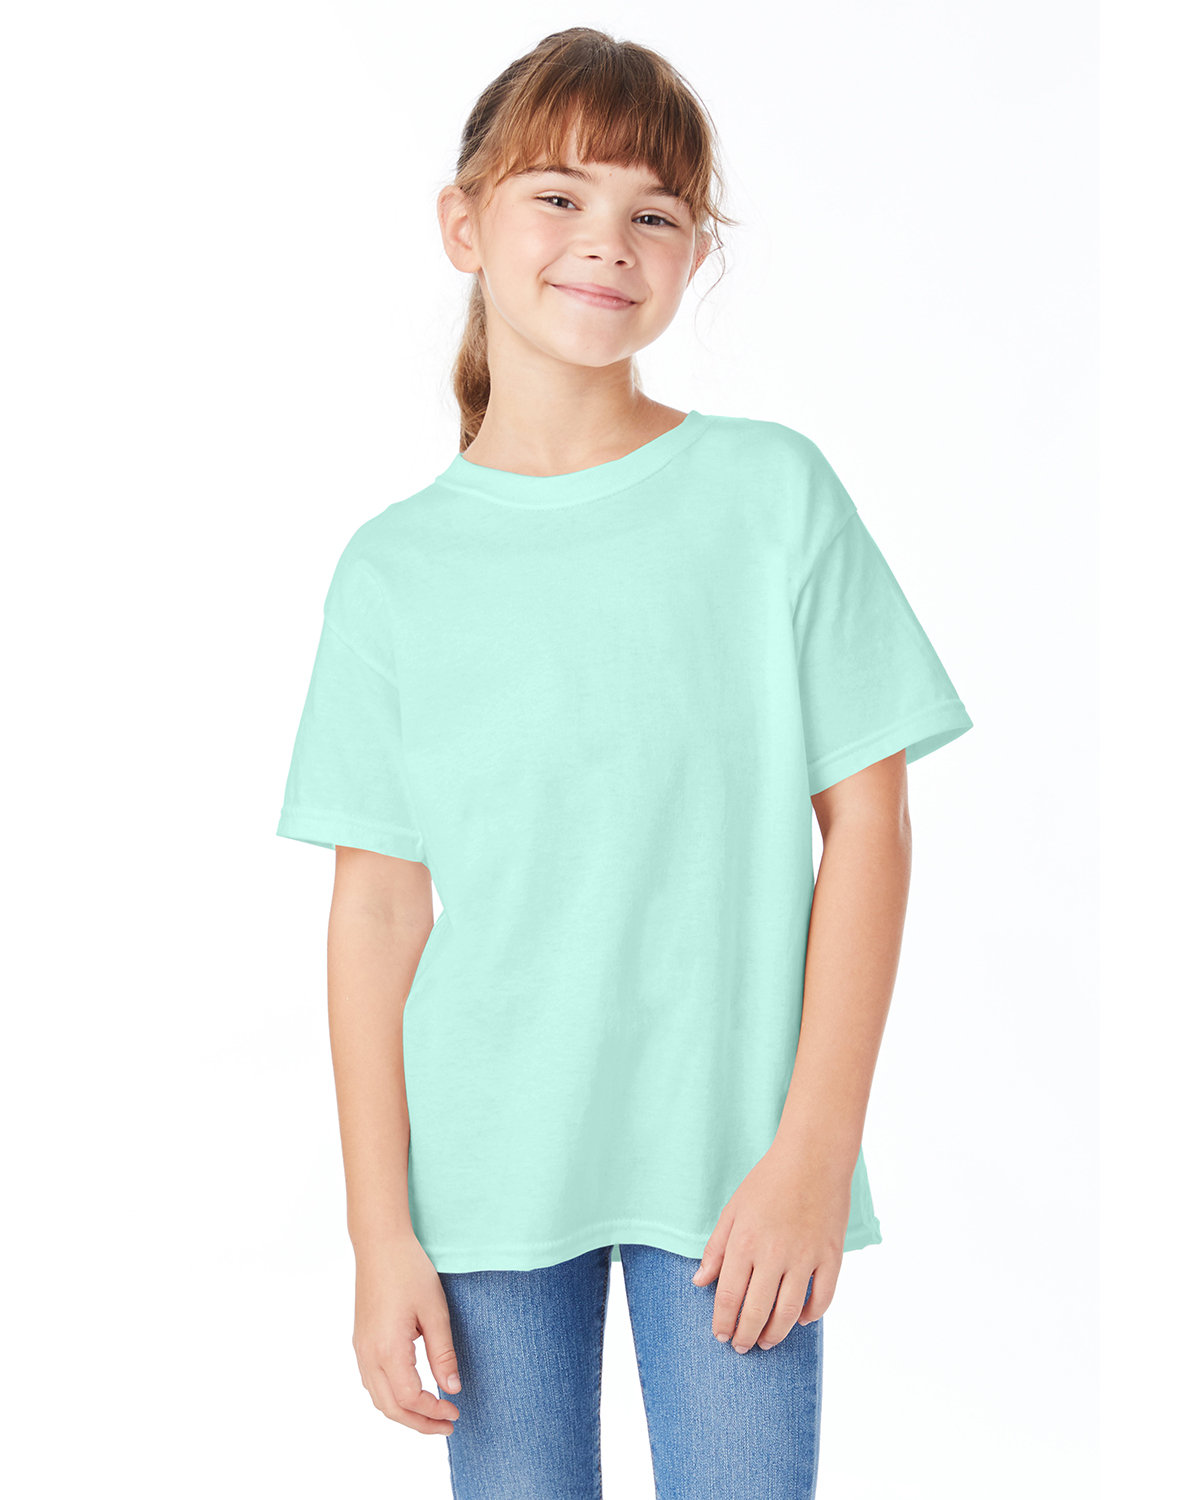 Hanes Youth Essential-T T-Shirt CLEAN MINT 